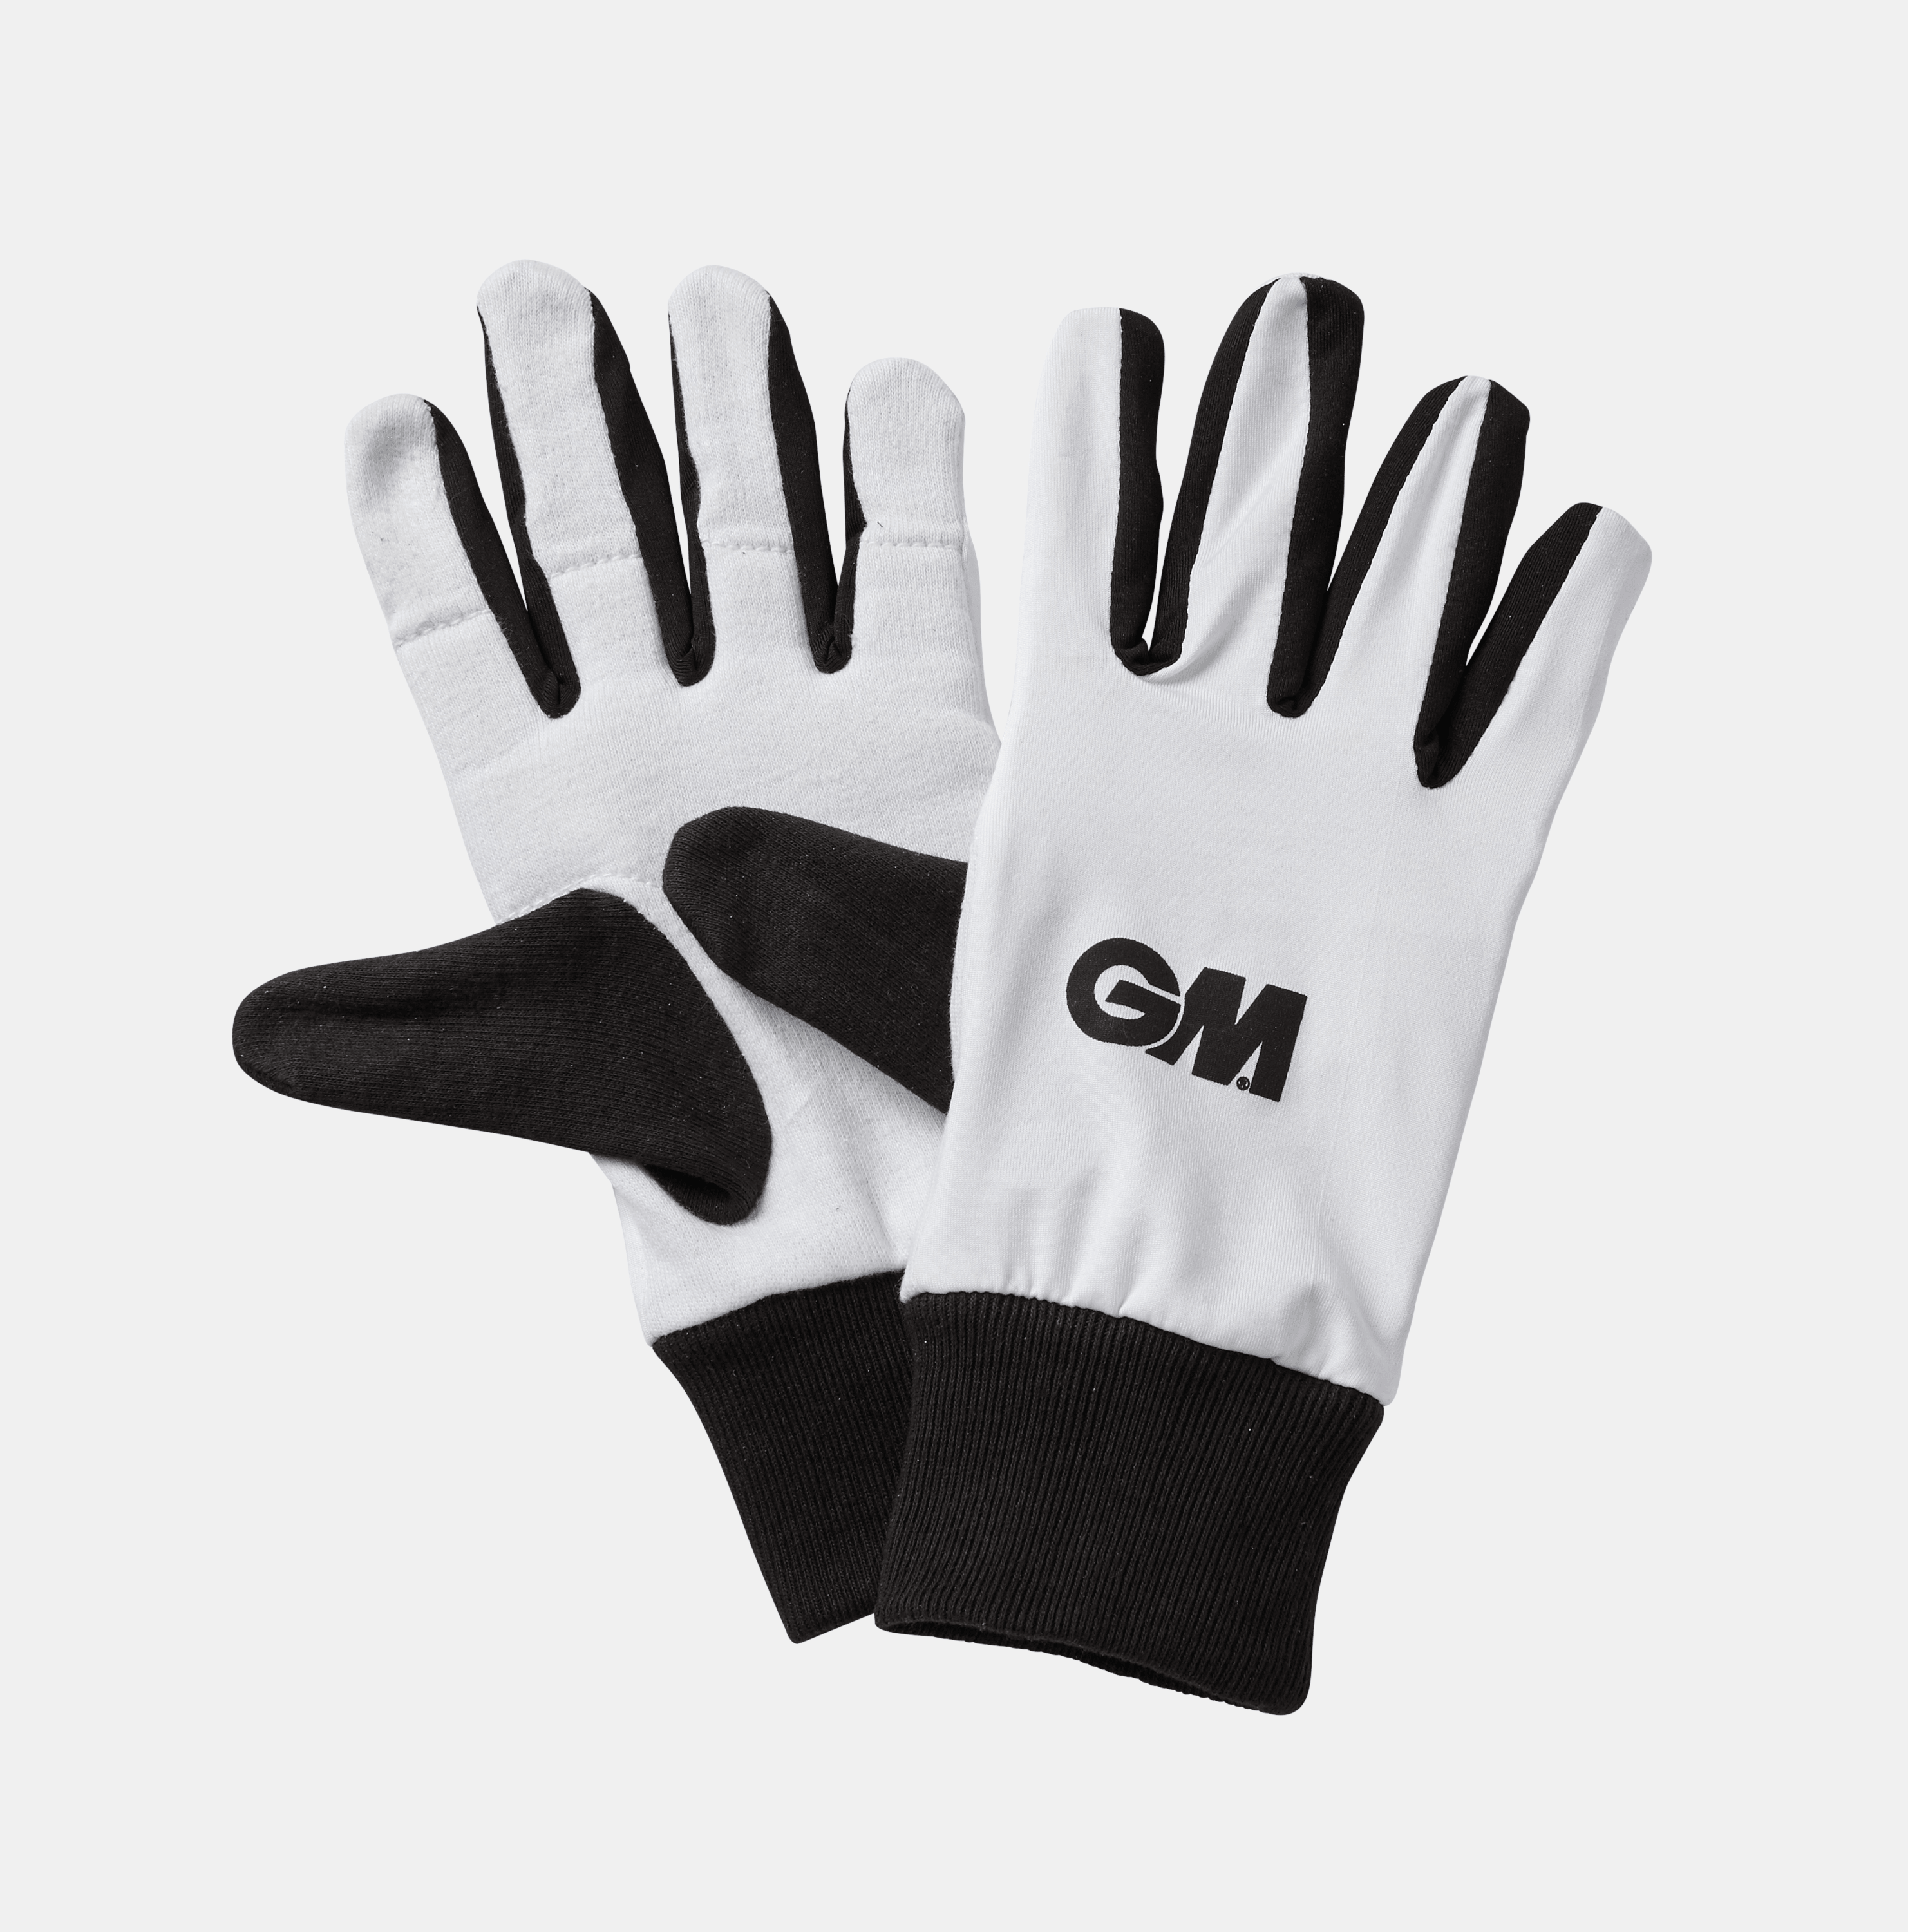 GM Padded Cotton INNER Wicket Keeping Gloves - ADULT - AT Sports